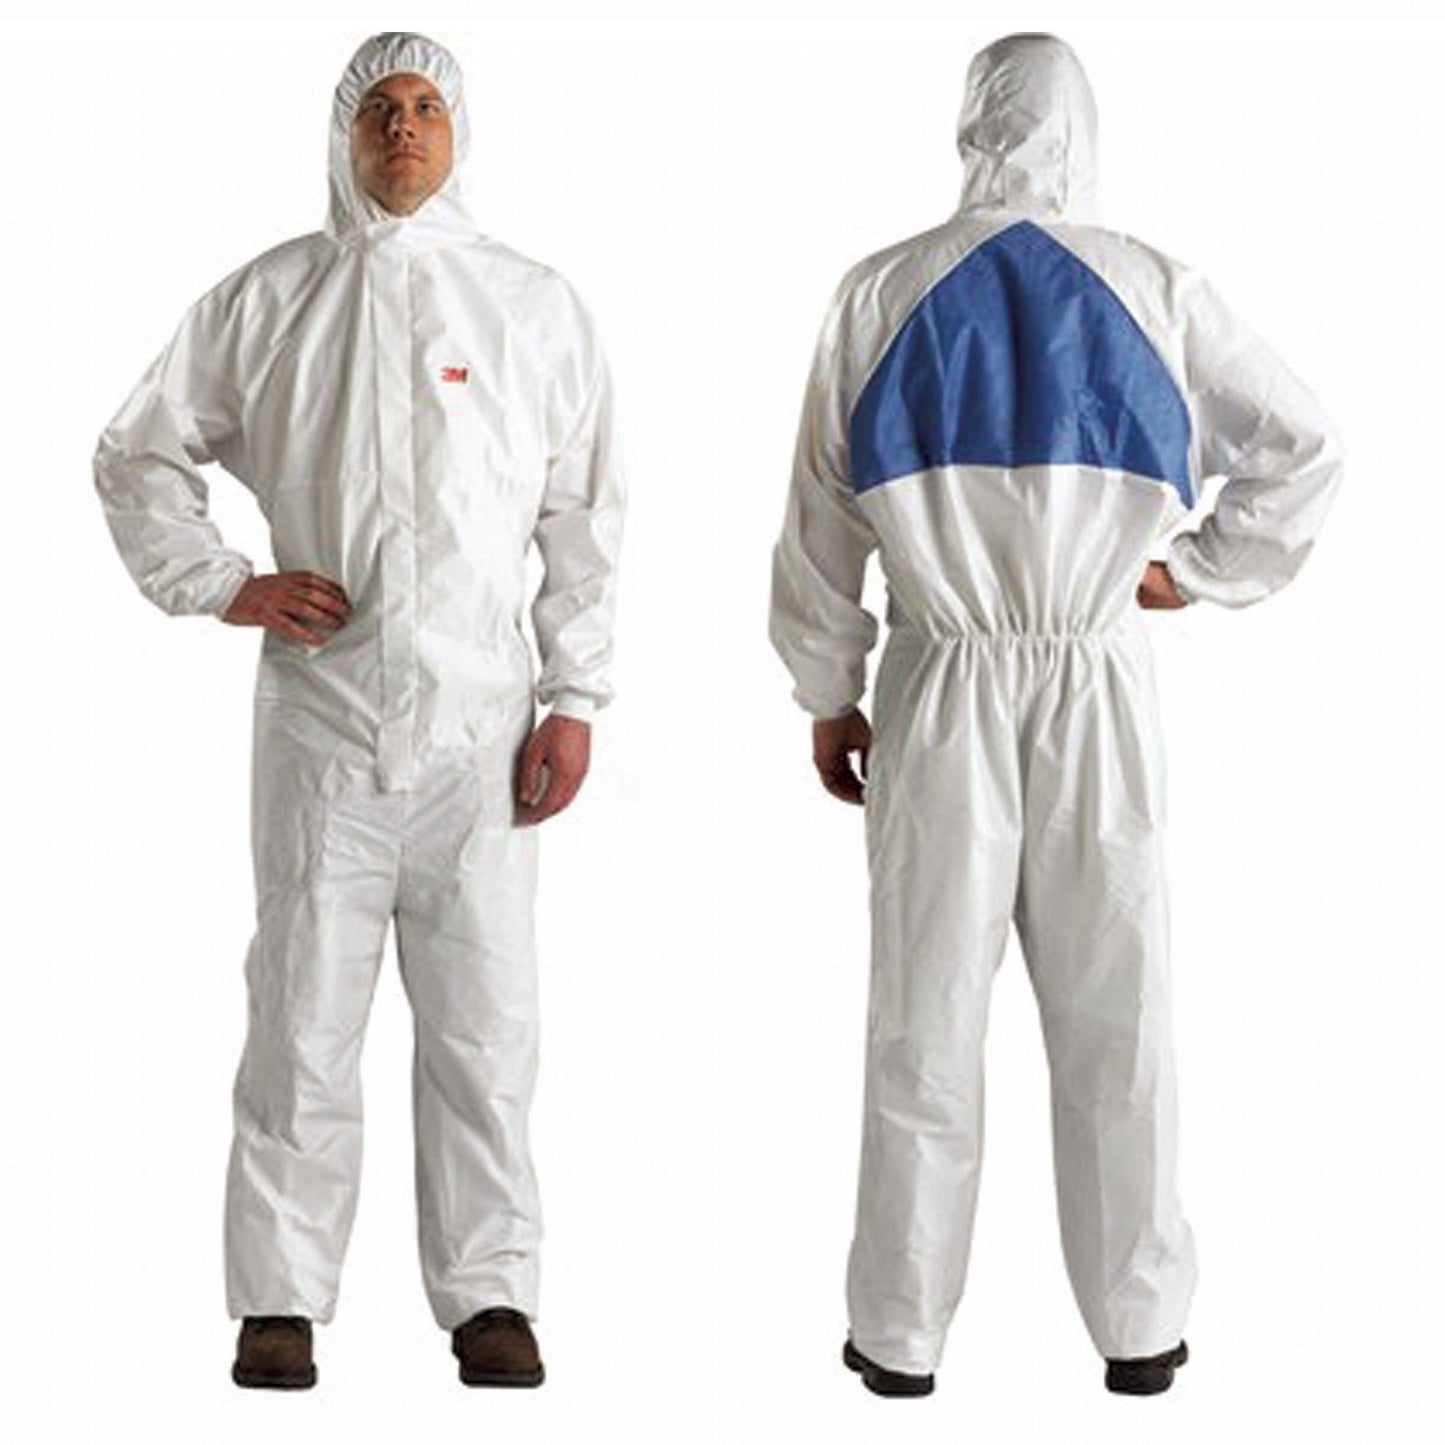 3M Protective Spray Painting Suit Overall Coverall 4540+ Type 5/6 - XL